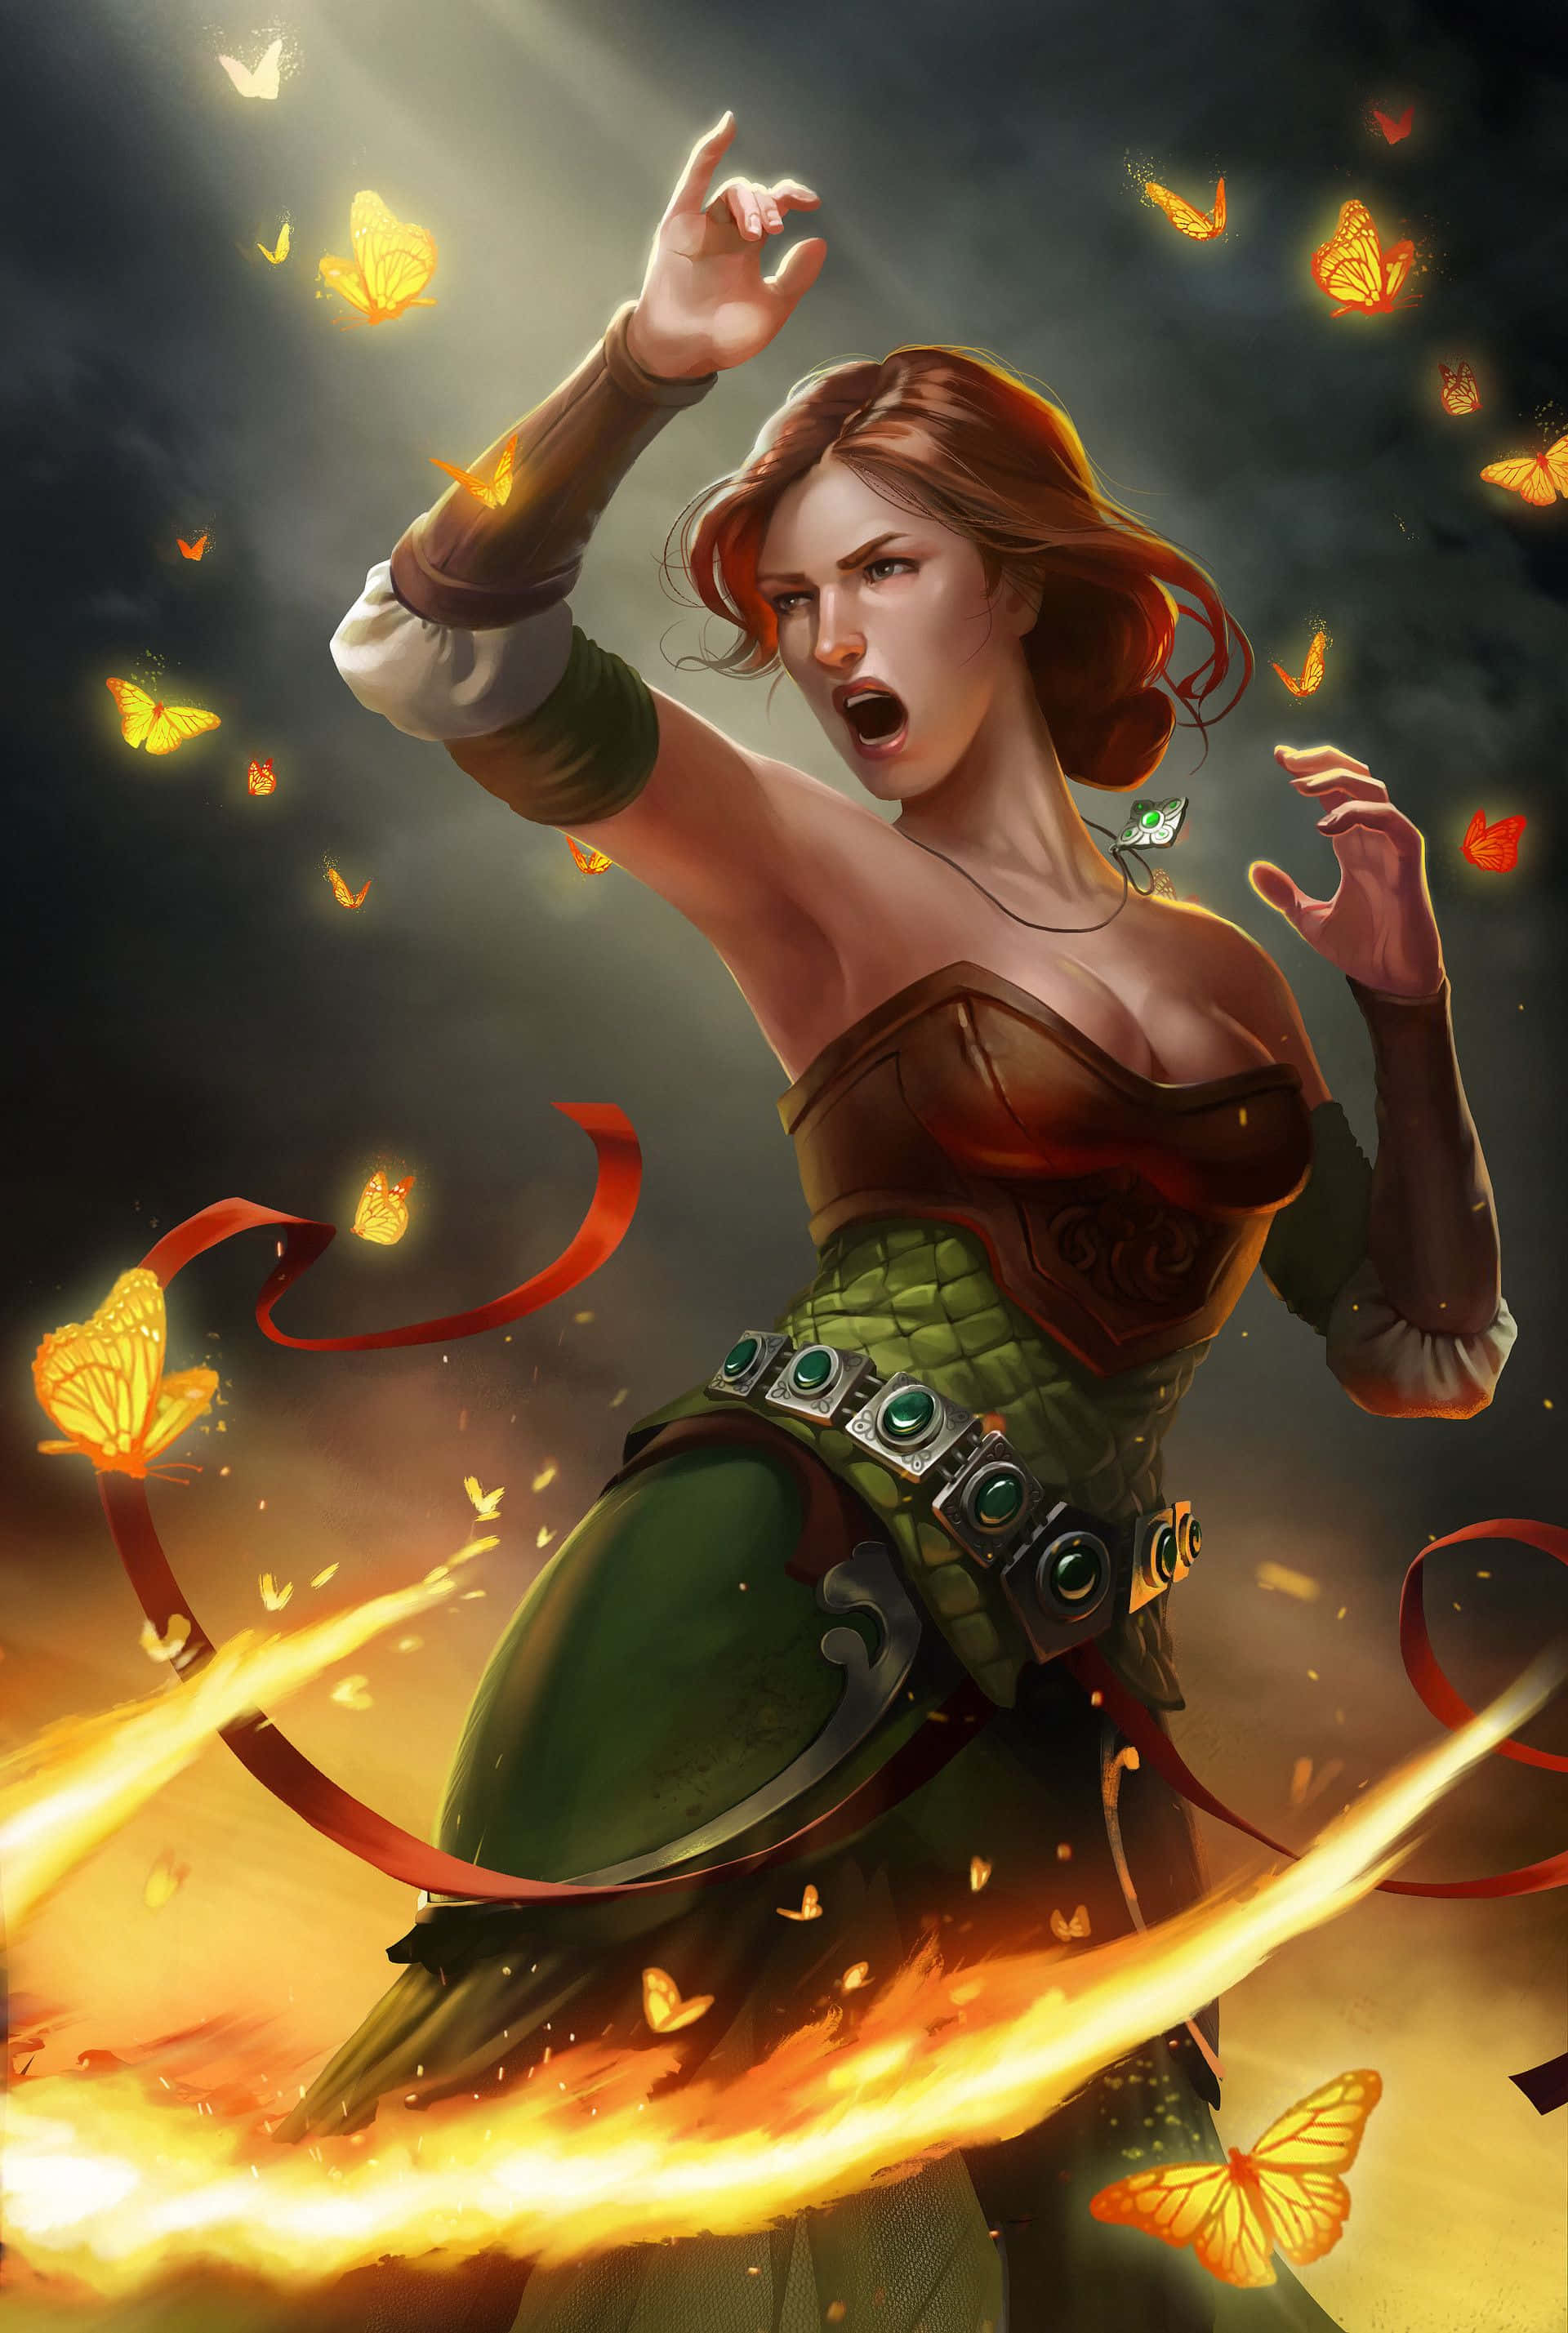 Caption: Vibrant And Mystical - Triss Merigold Of The Witcher Series Wallpaper